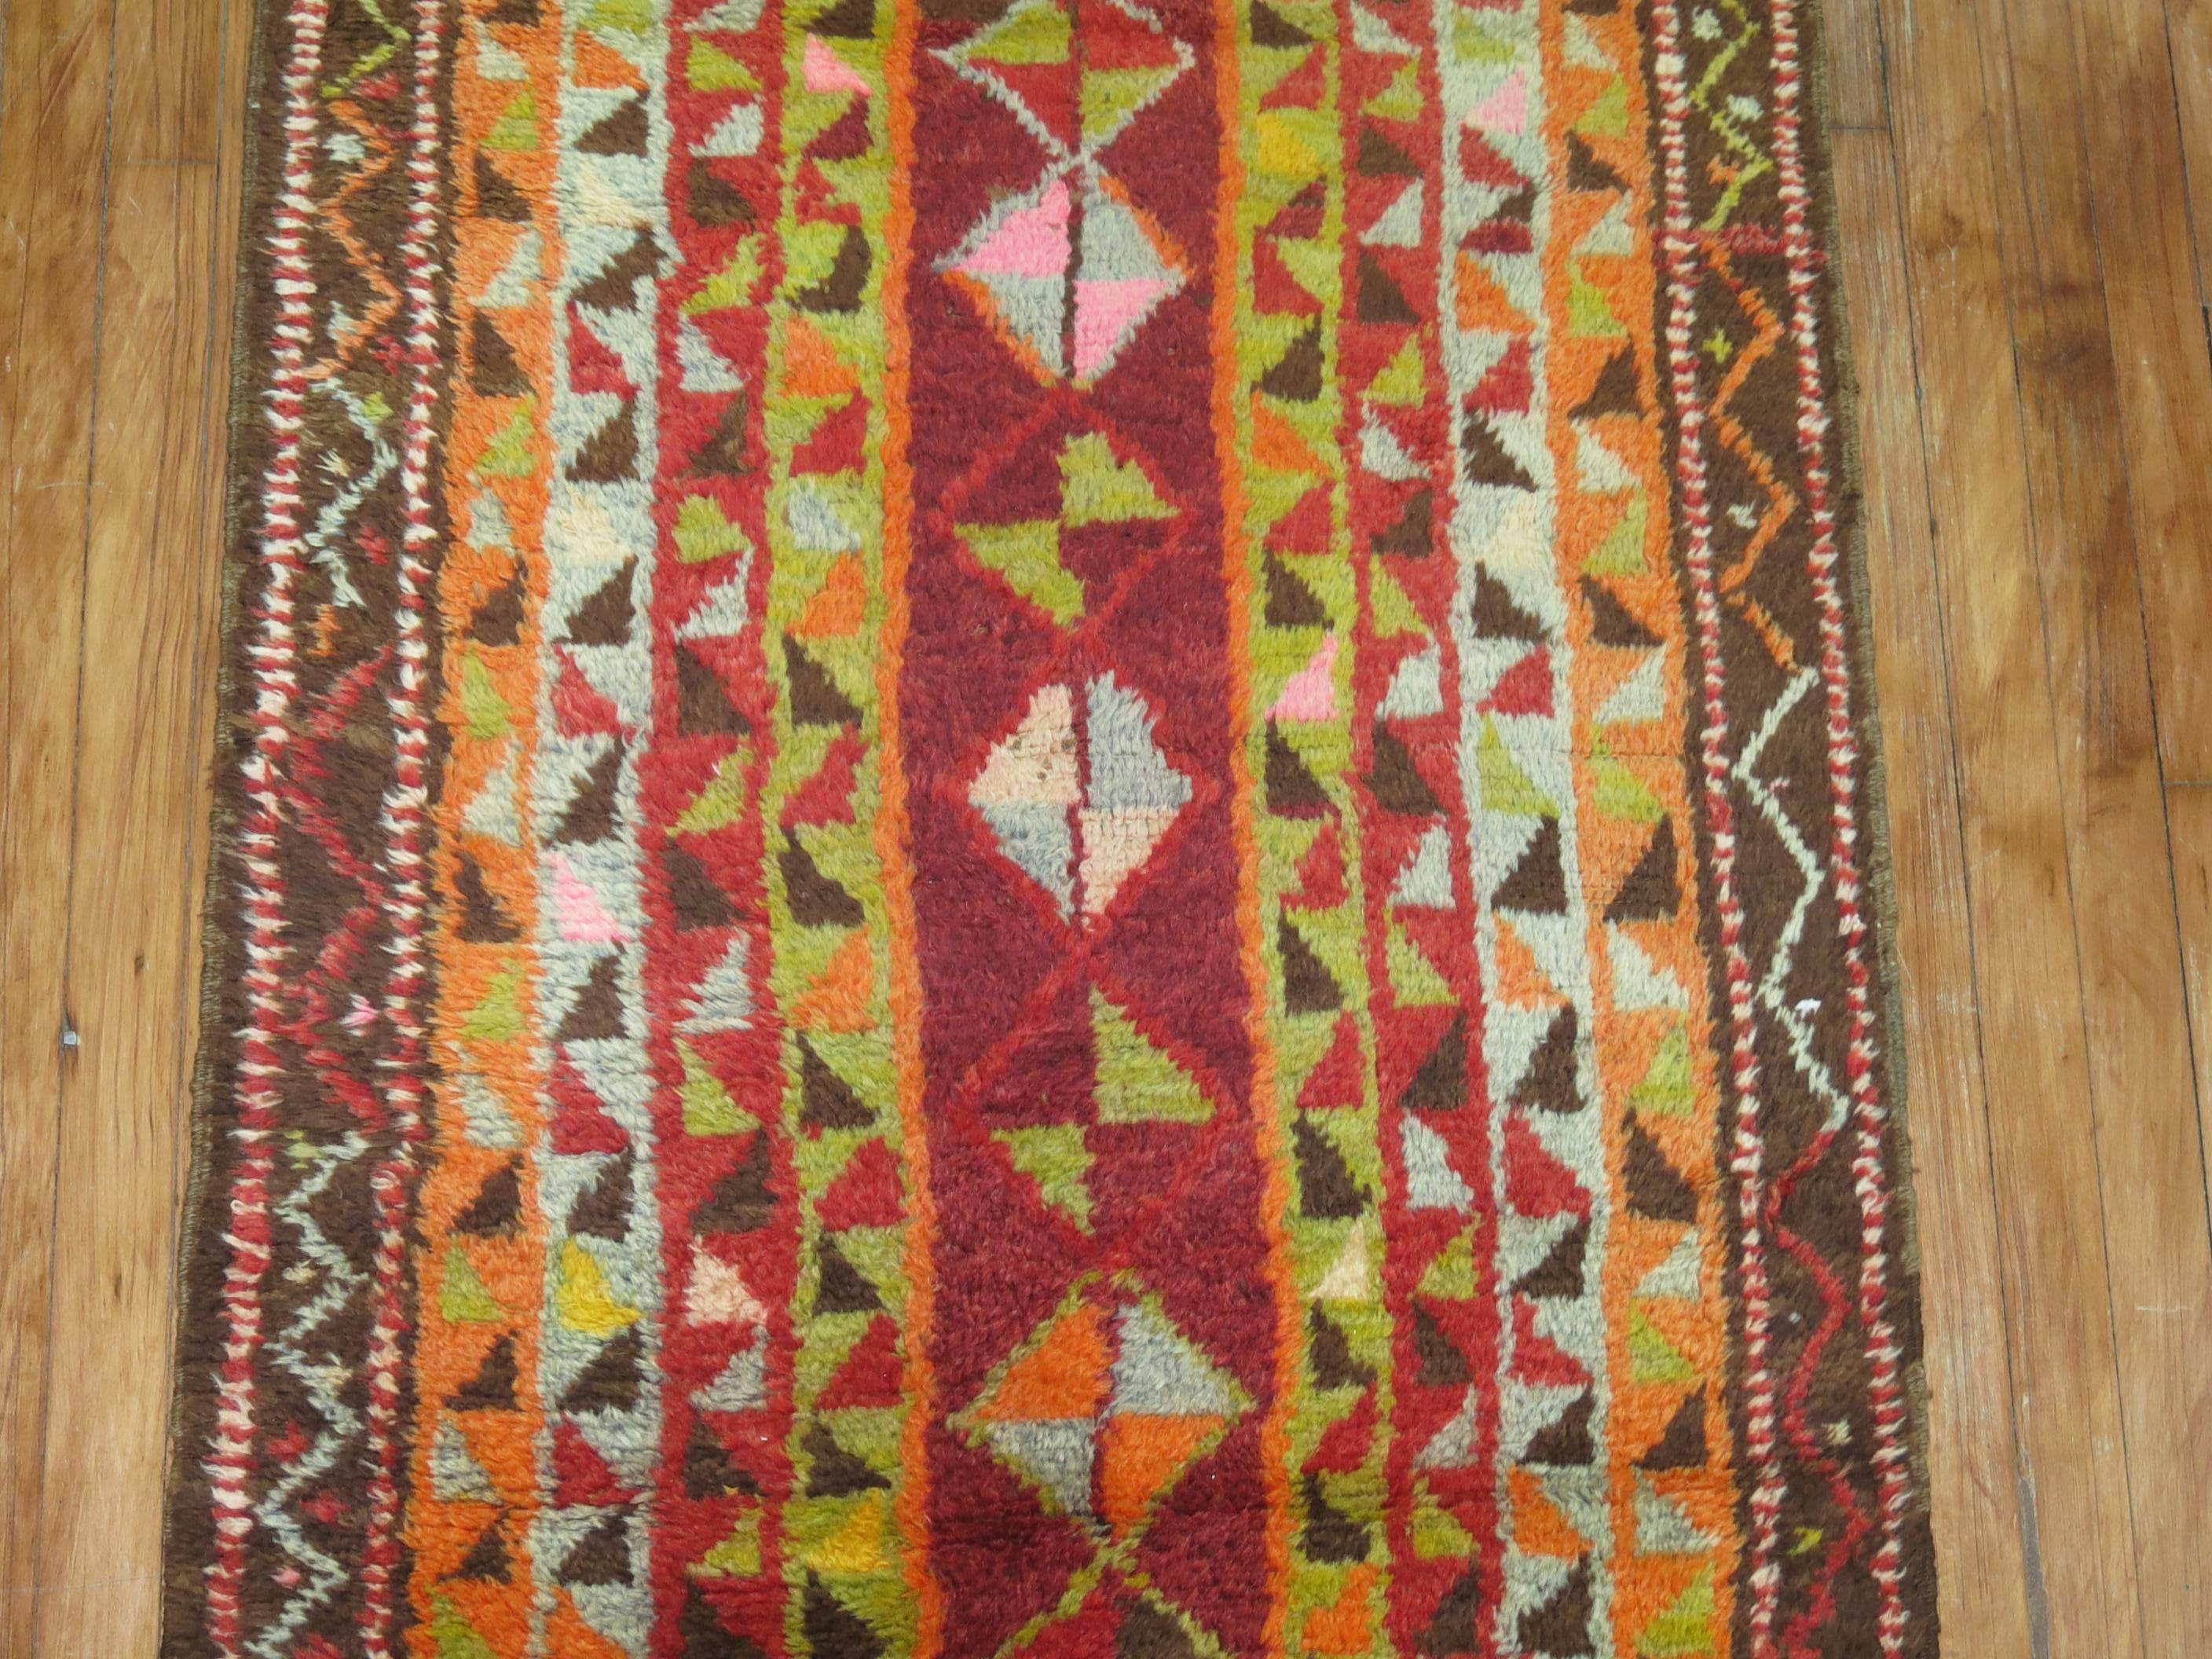 Amid 20th century Turkish Tulu Runner with an abstract motif with an array of colors

Measures: 2'10” x 11'3”.